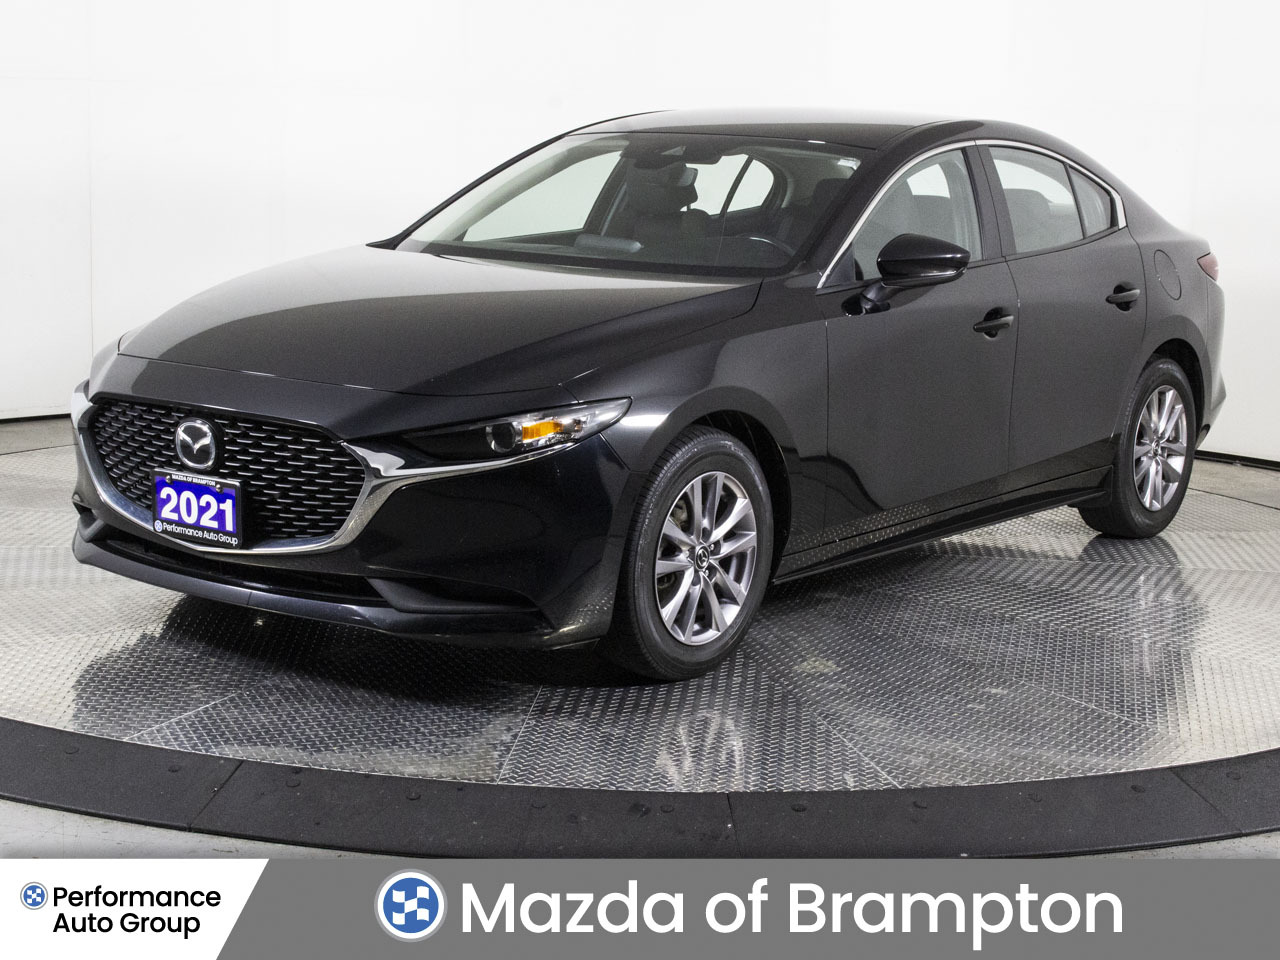 2021 Mazda Mazda3 GS FWD 1 OWNER CLEAN CARFAX HEATED SEATS + MORE!